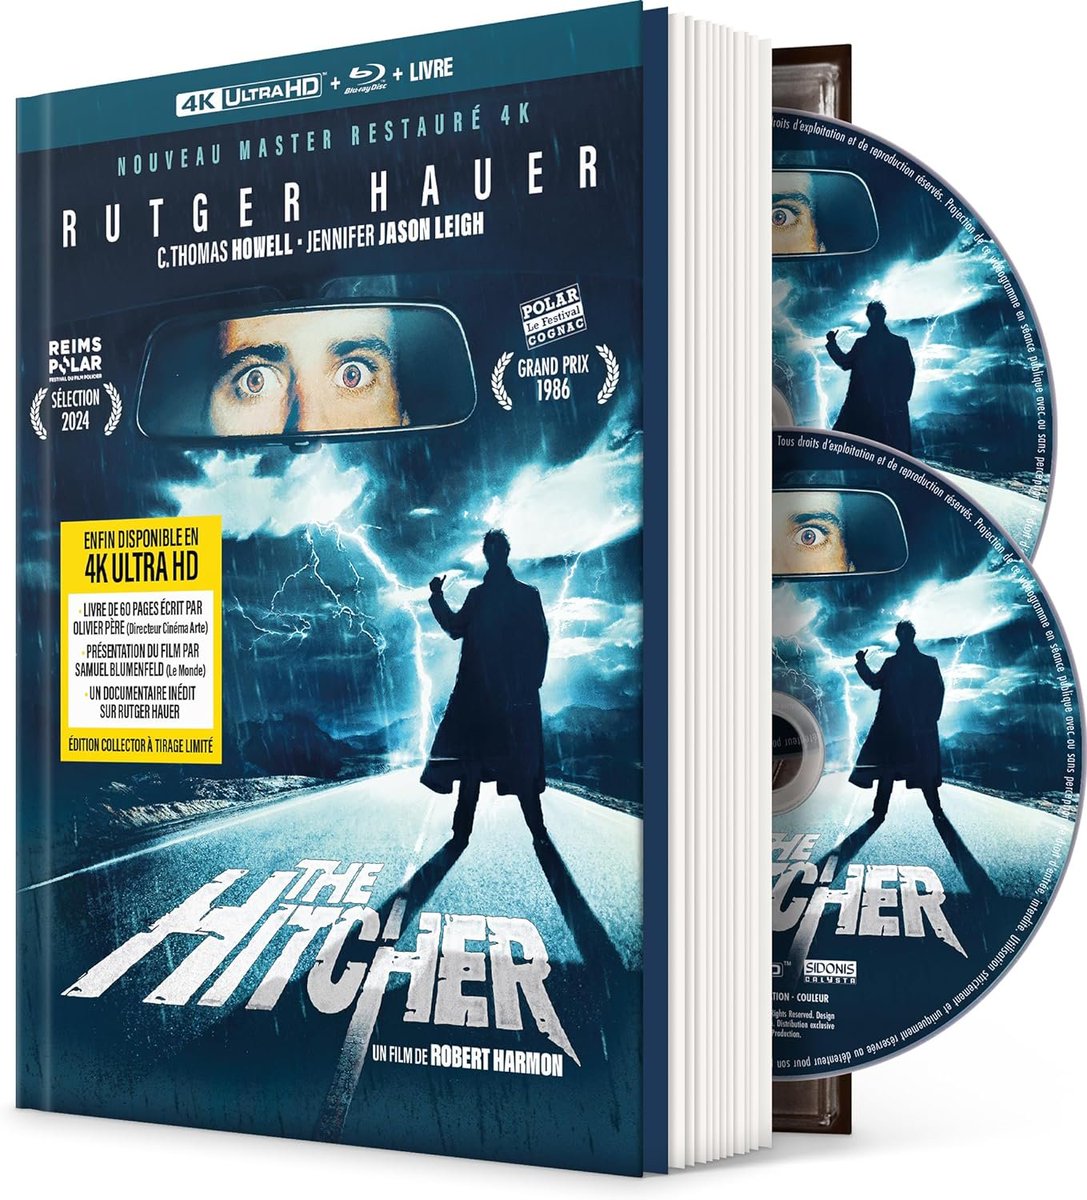 Update: 'The Hitcher' 4K UHD Blu-ray in a type of Mediabook Edition at Amazon FR, release date 12 April. amazon.fr/Hitcher-Ultra-… via @SidonisCalysta 🔊 Audio: English 🇬🇧, French 🇫🇷 💬Subtitles: 🇫🇷 Final cover and disc art: